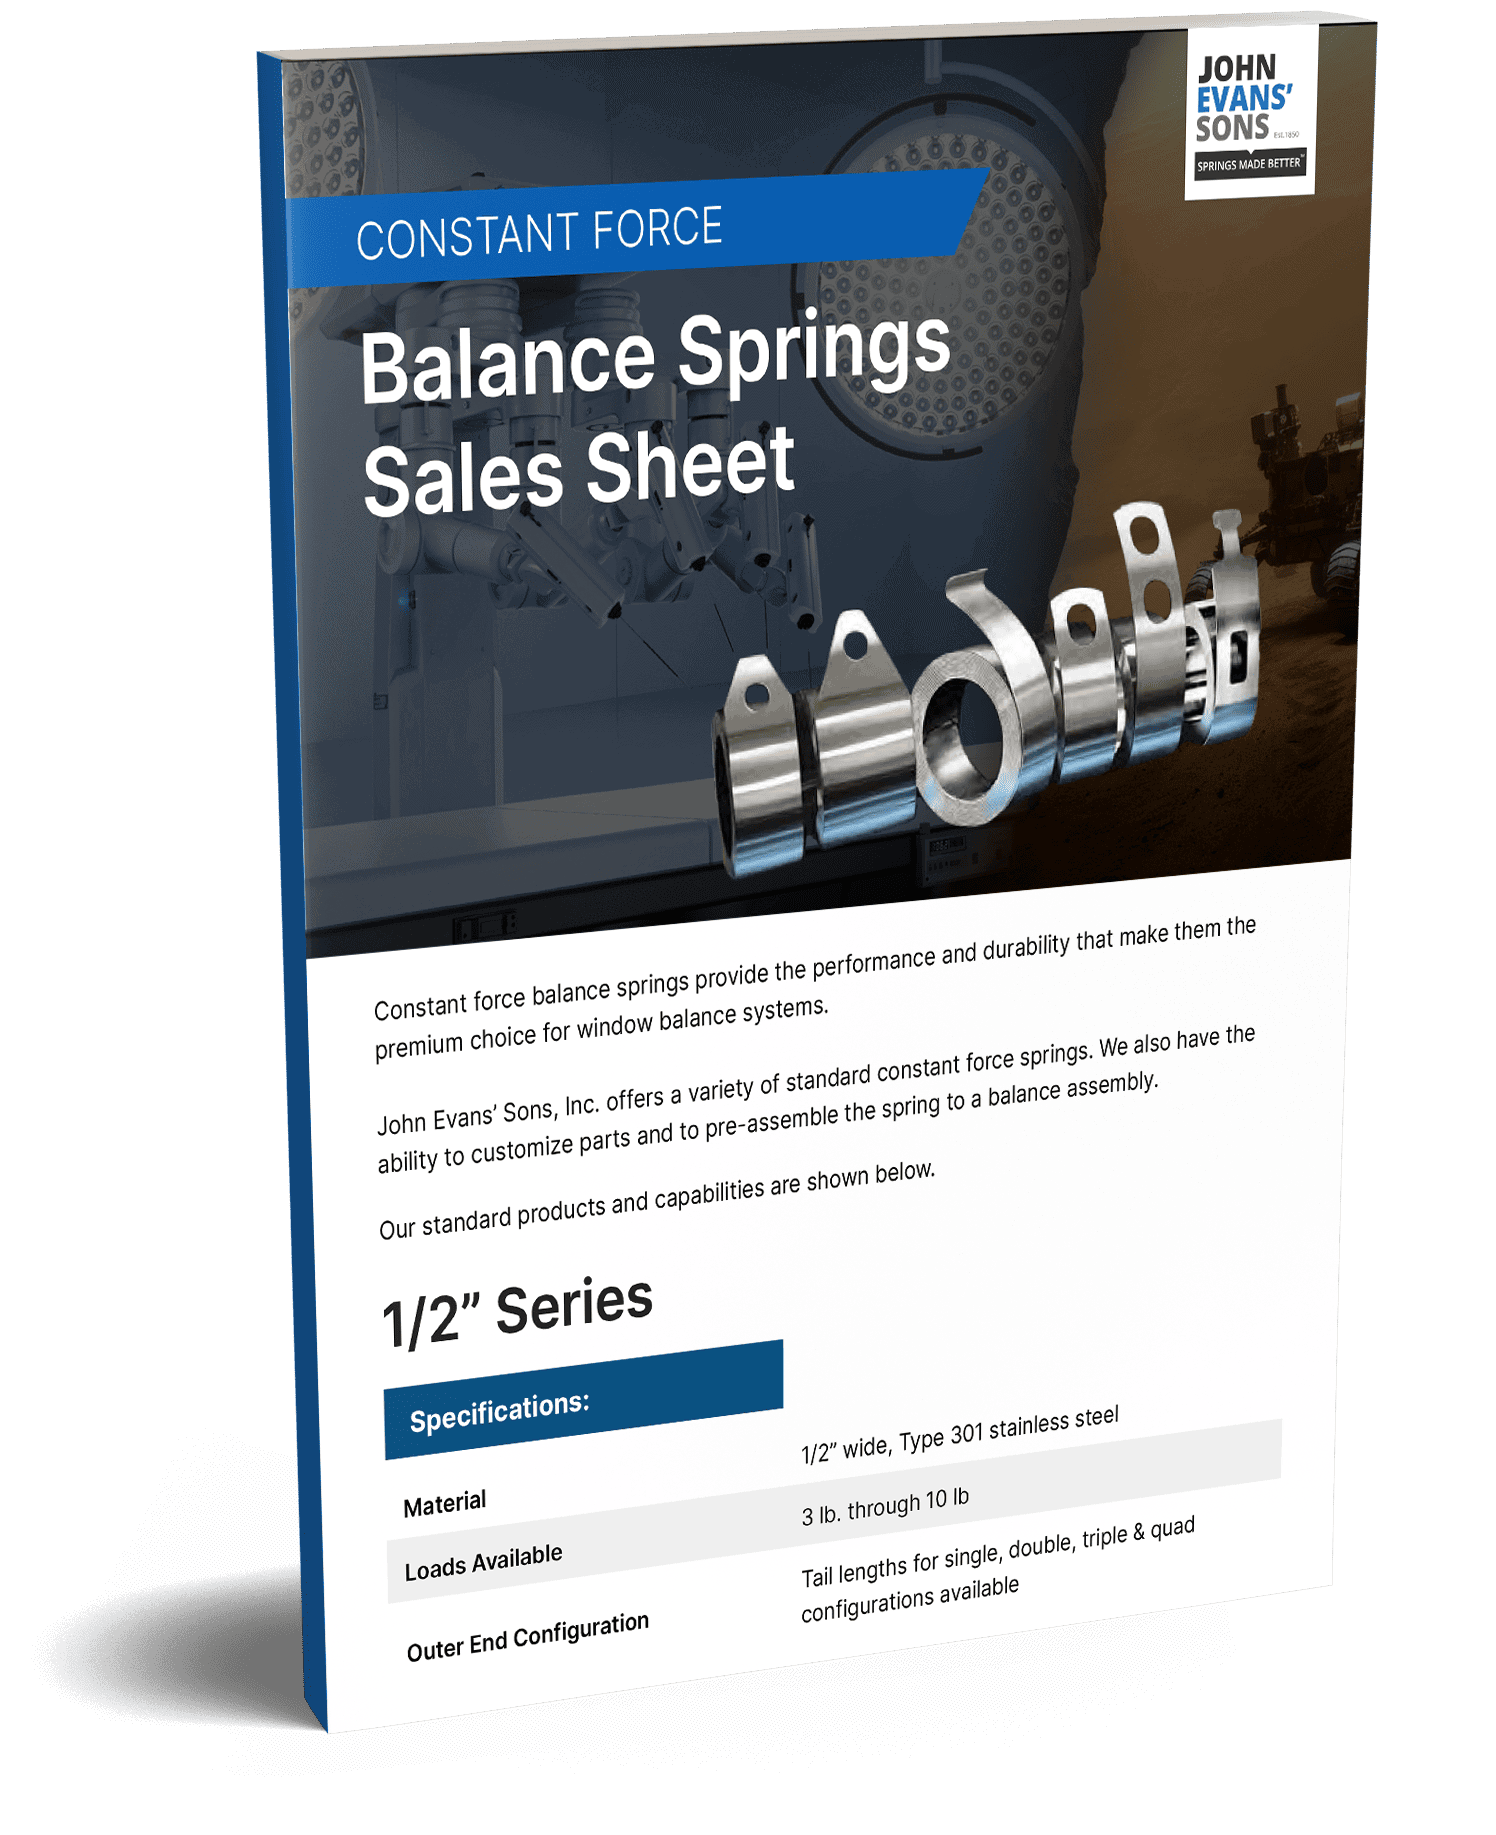 Constant Force: Balance Springs Sales Sheet